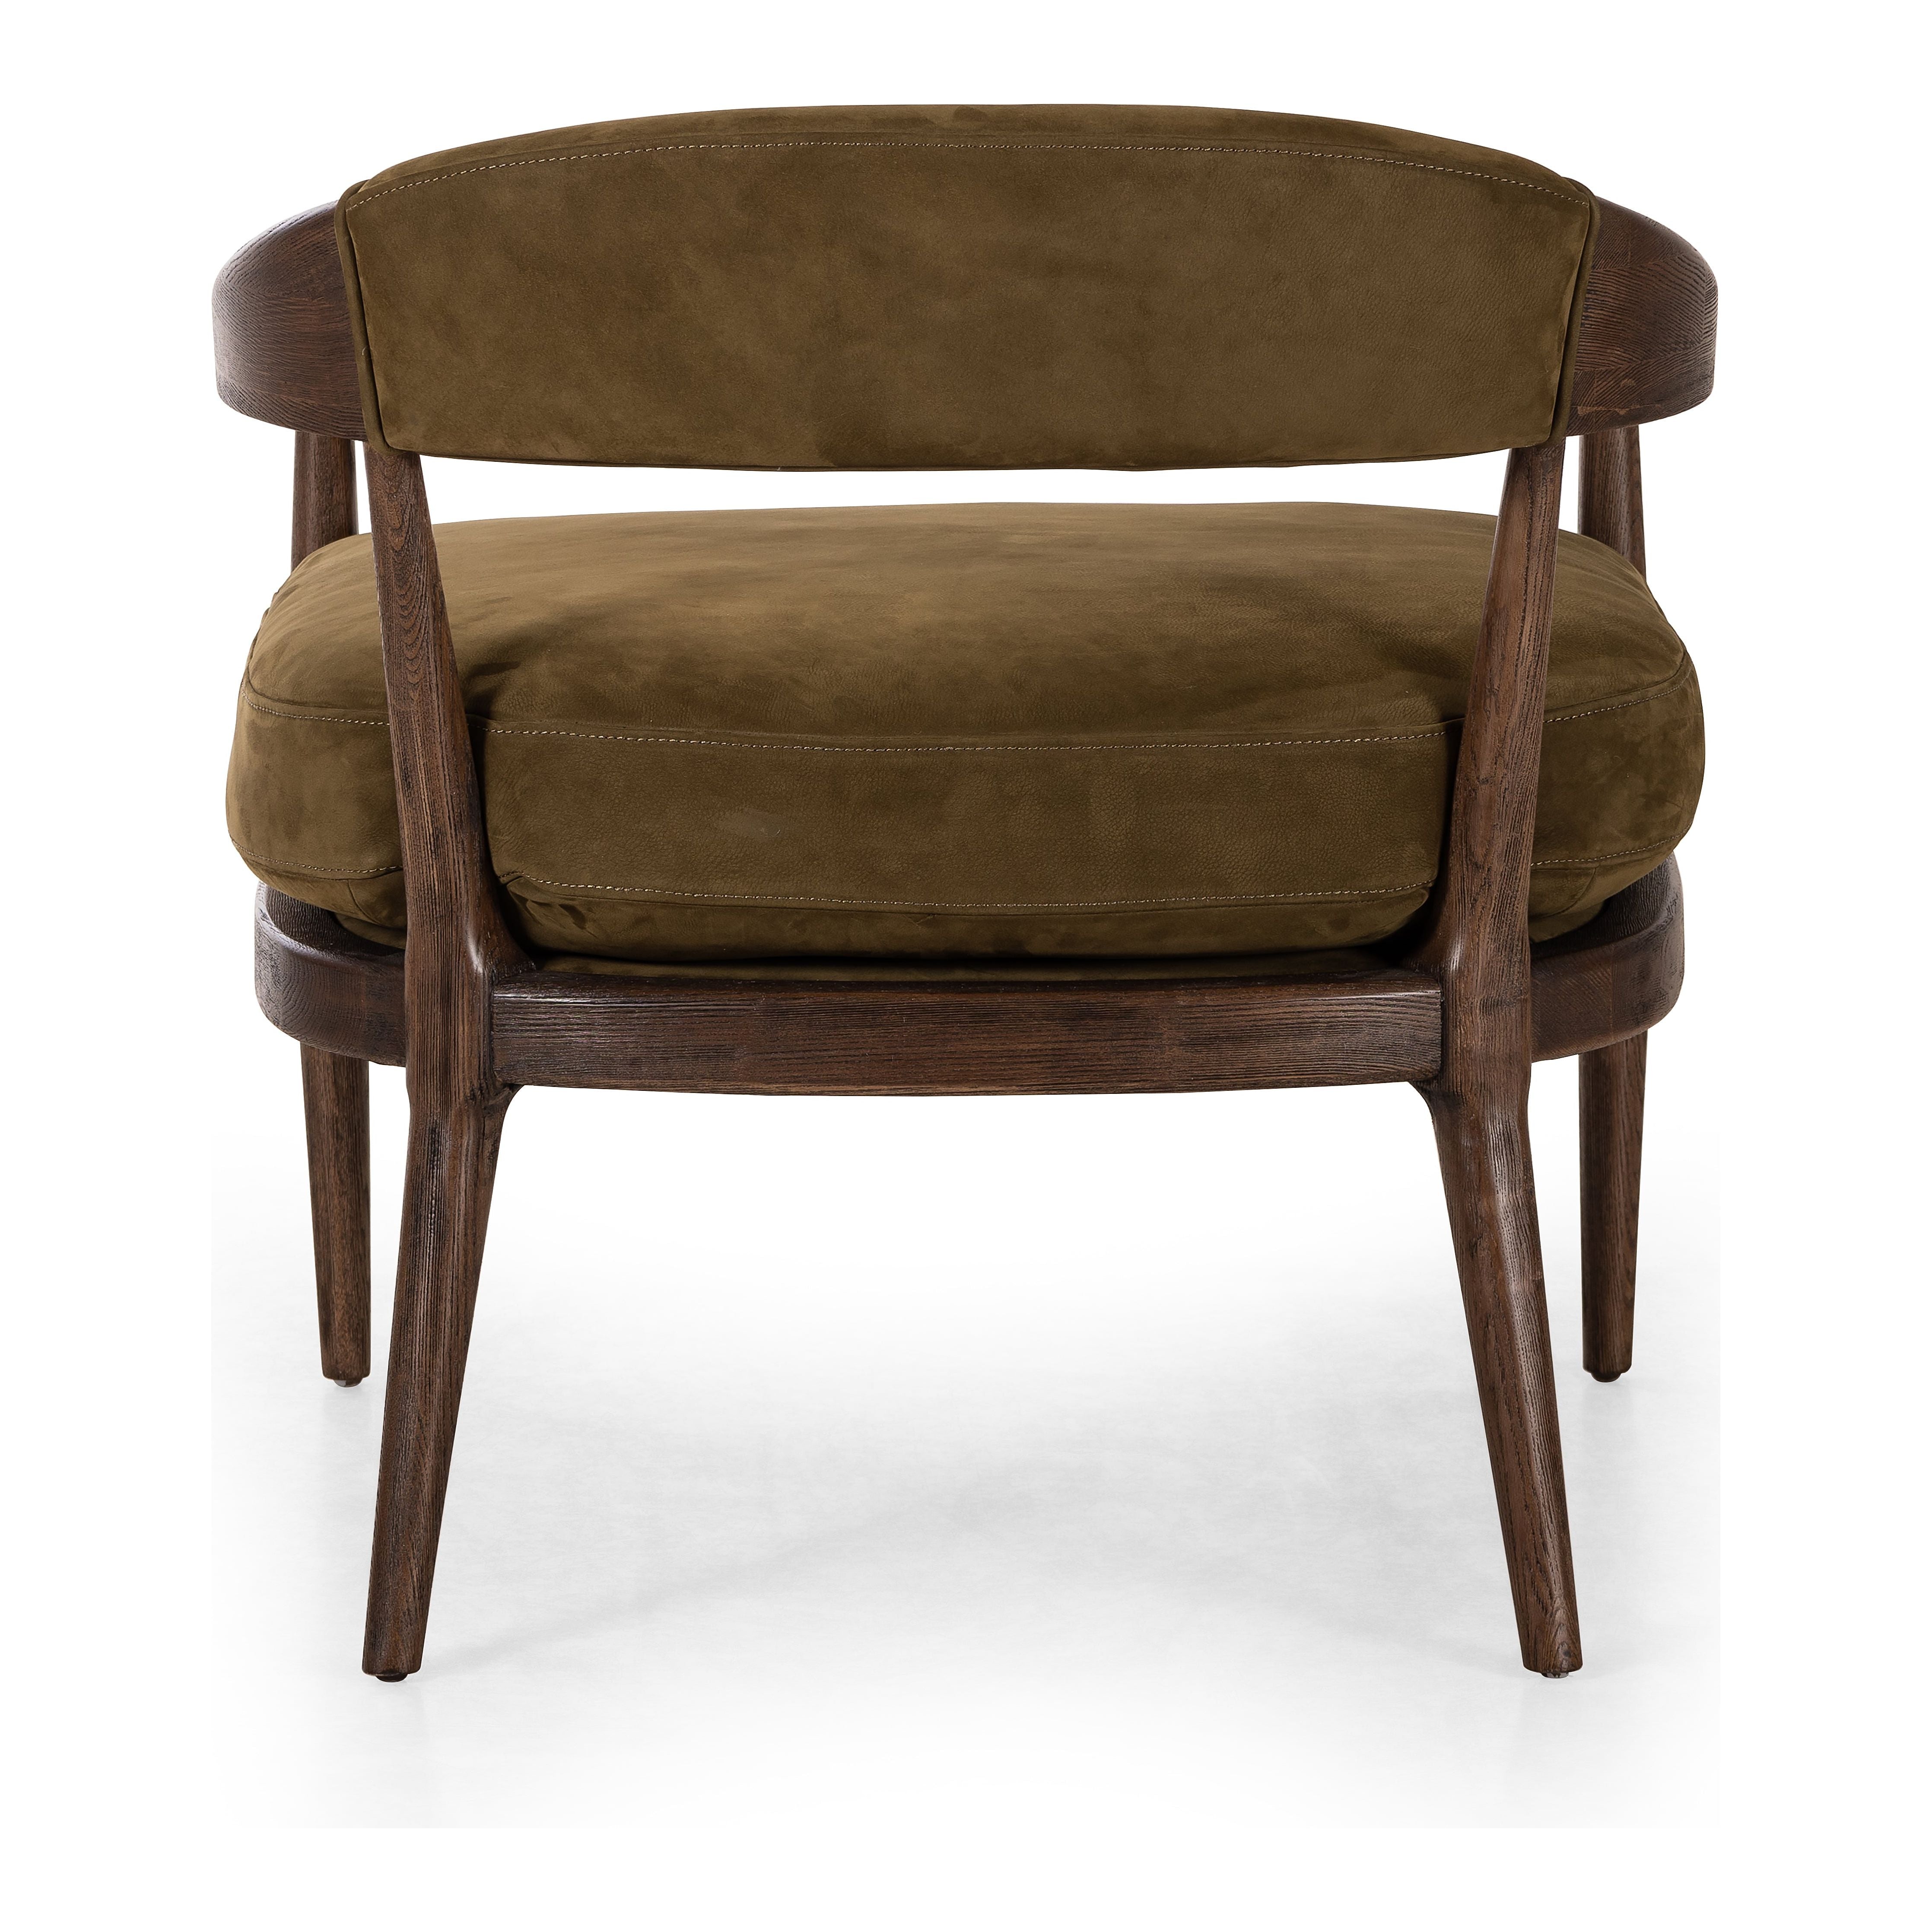 Safari styling is brought to modern speed on this vintage-inspired chair. Its solid wood frame features a webbed seating structure that brings a sink-in feel to the entire piece. The upholstered back, strap details and loose cushion are finished in a rich Italian-made leather with a soft, buttery feel and subtle highs and lows throughout the hide that bring movement to the entire piece. Amethyst Home provides interior design, new construction, custom furniture, and area rugs in the Houston metro area.